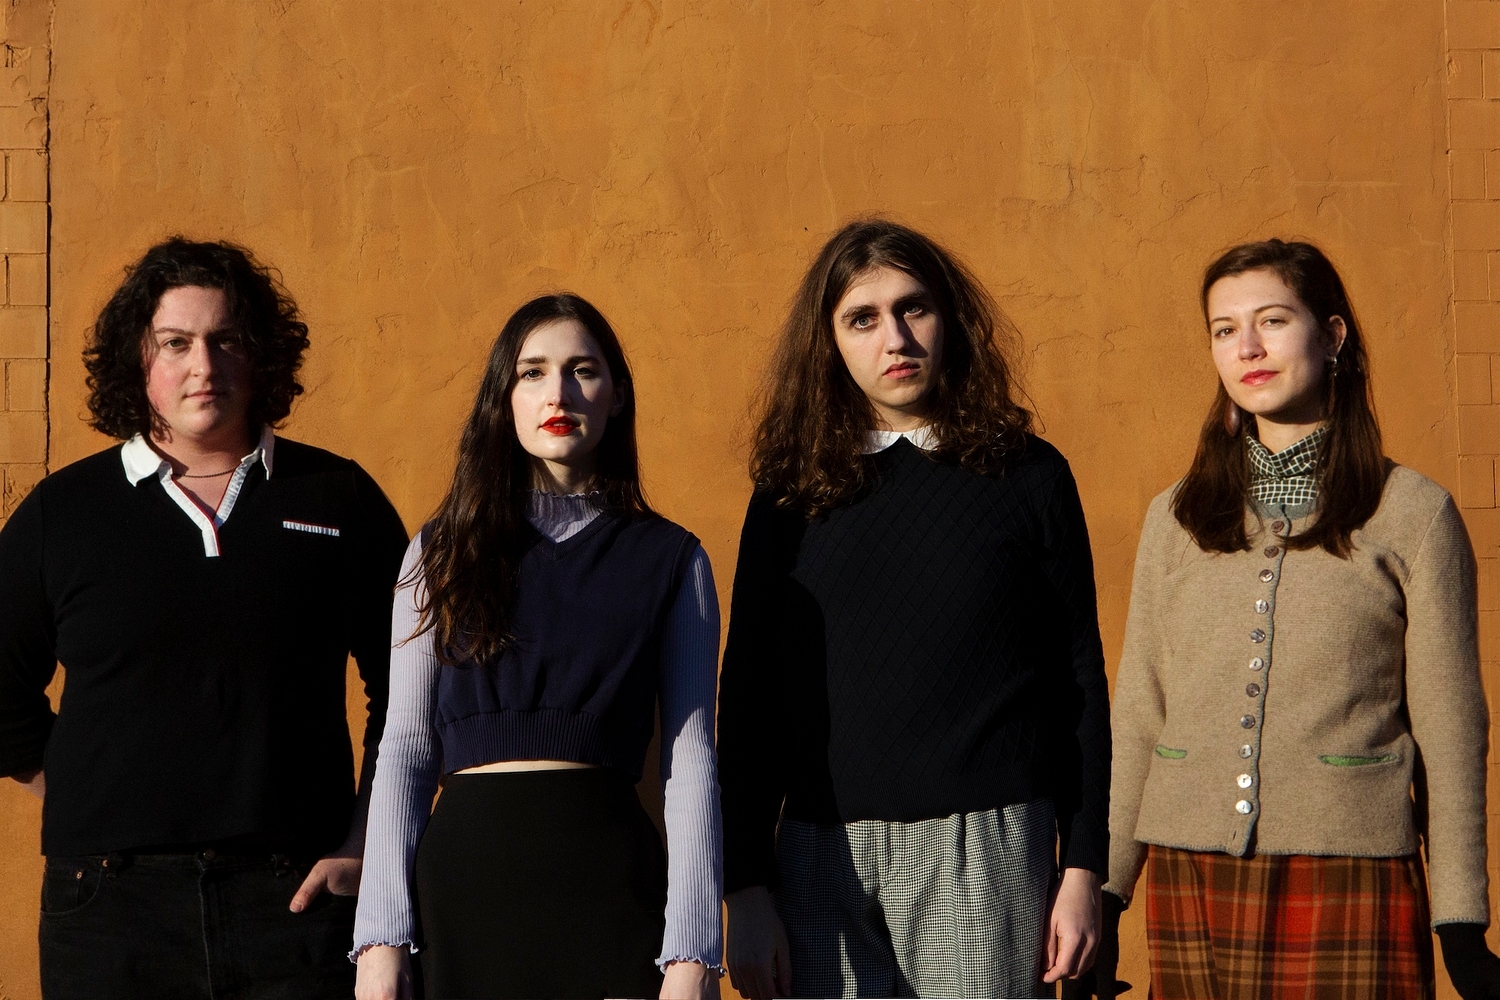 The Ophelias share new single ‘The Twilight Zone’